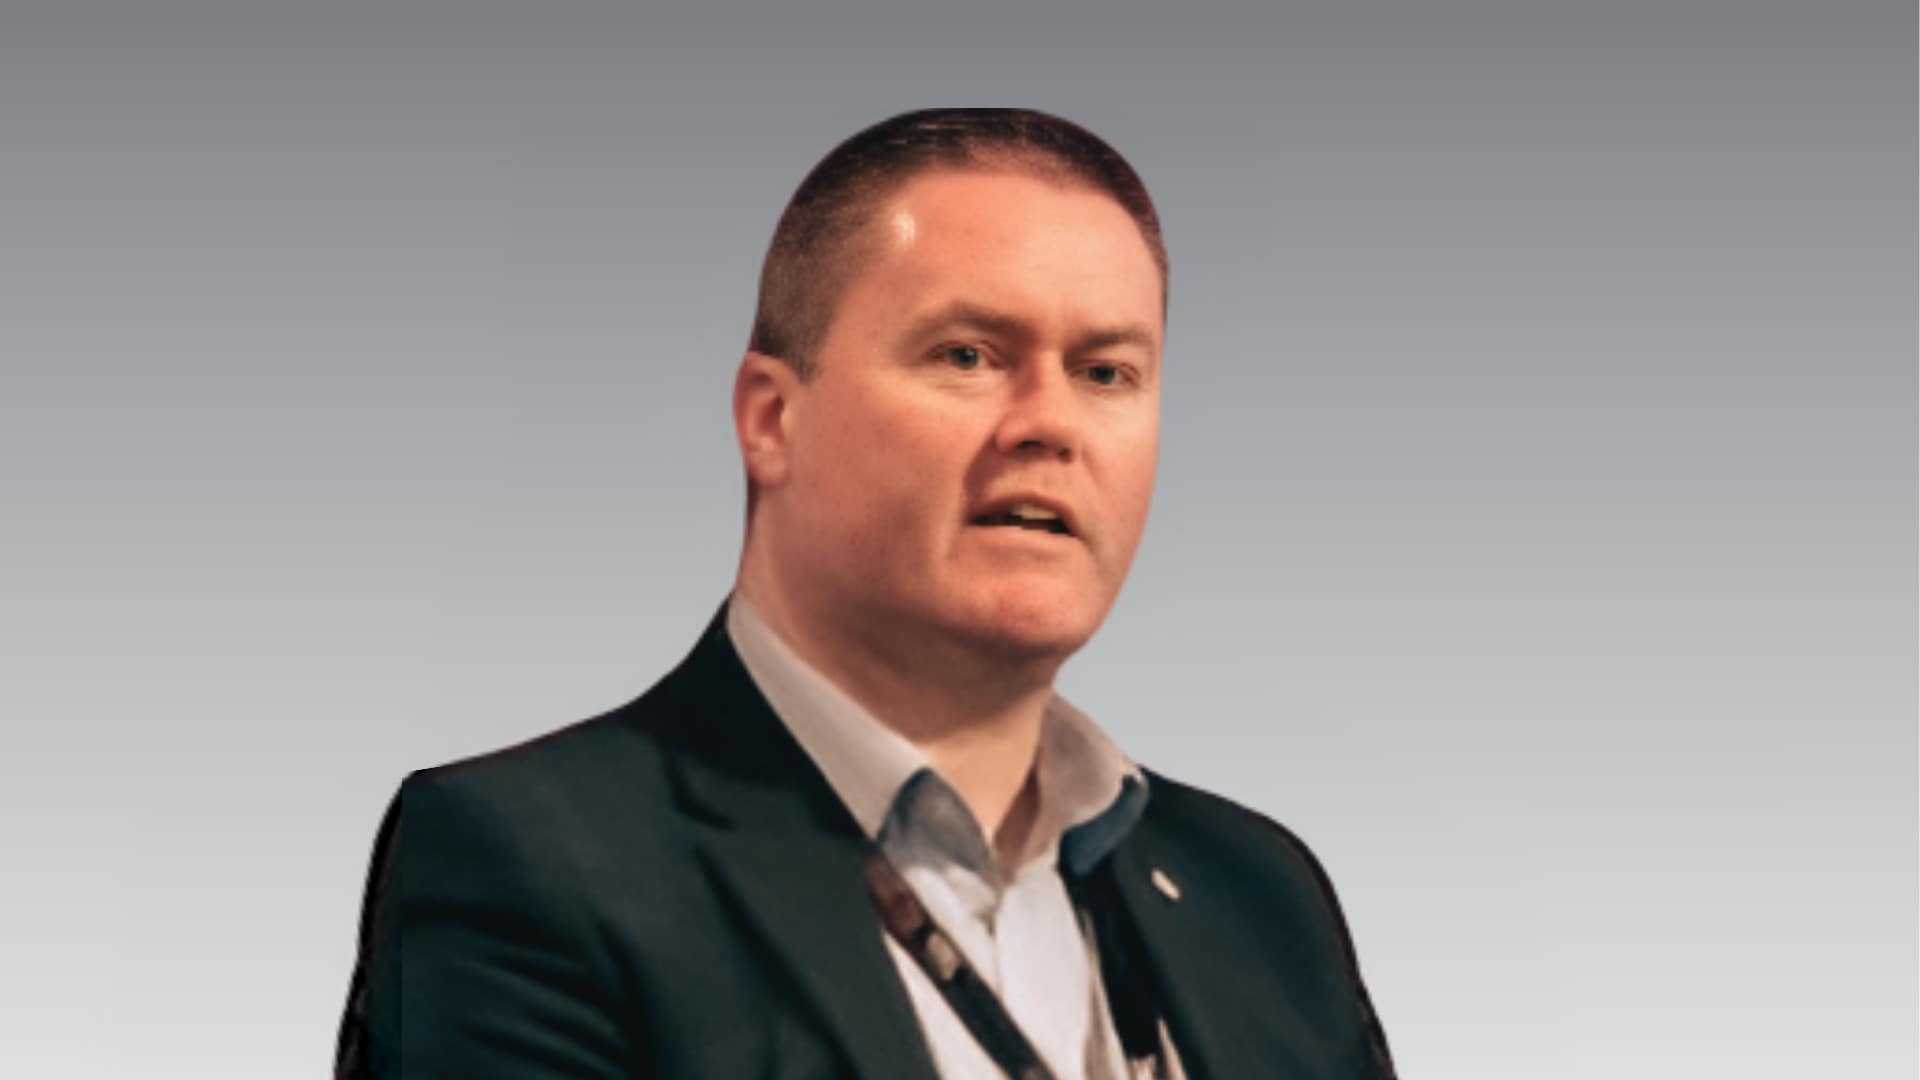 Stephen Bowes, Global Practice Director for Security Technologies